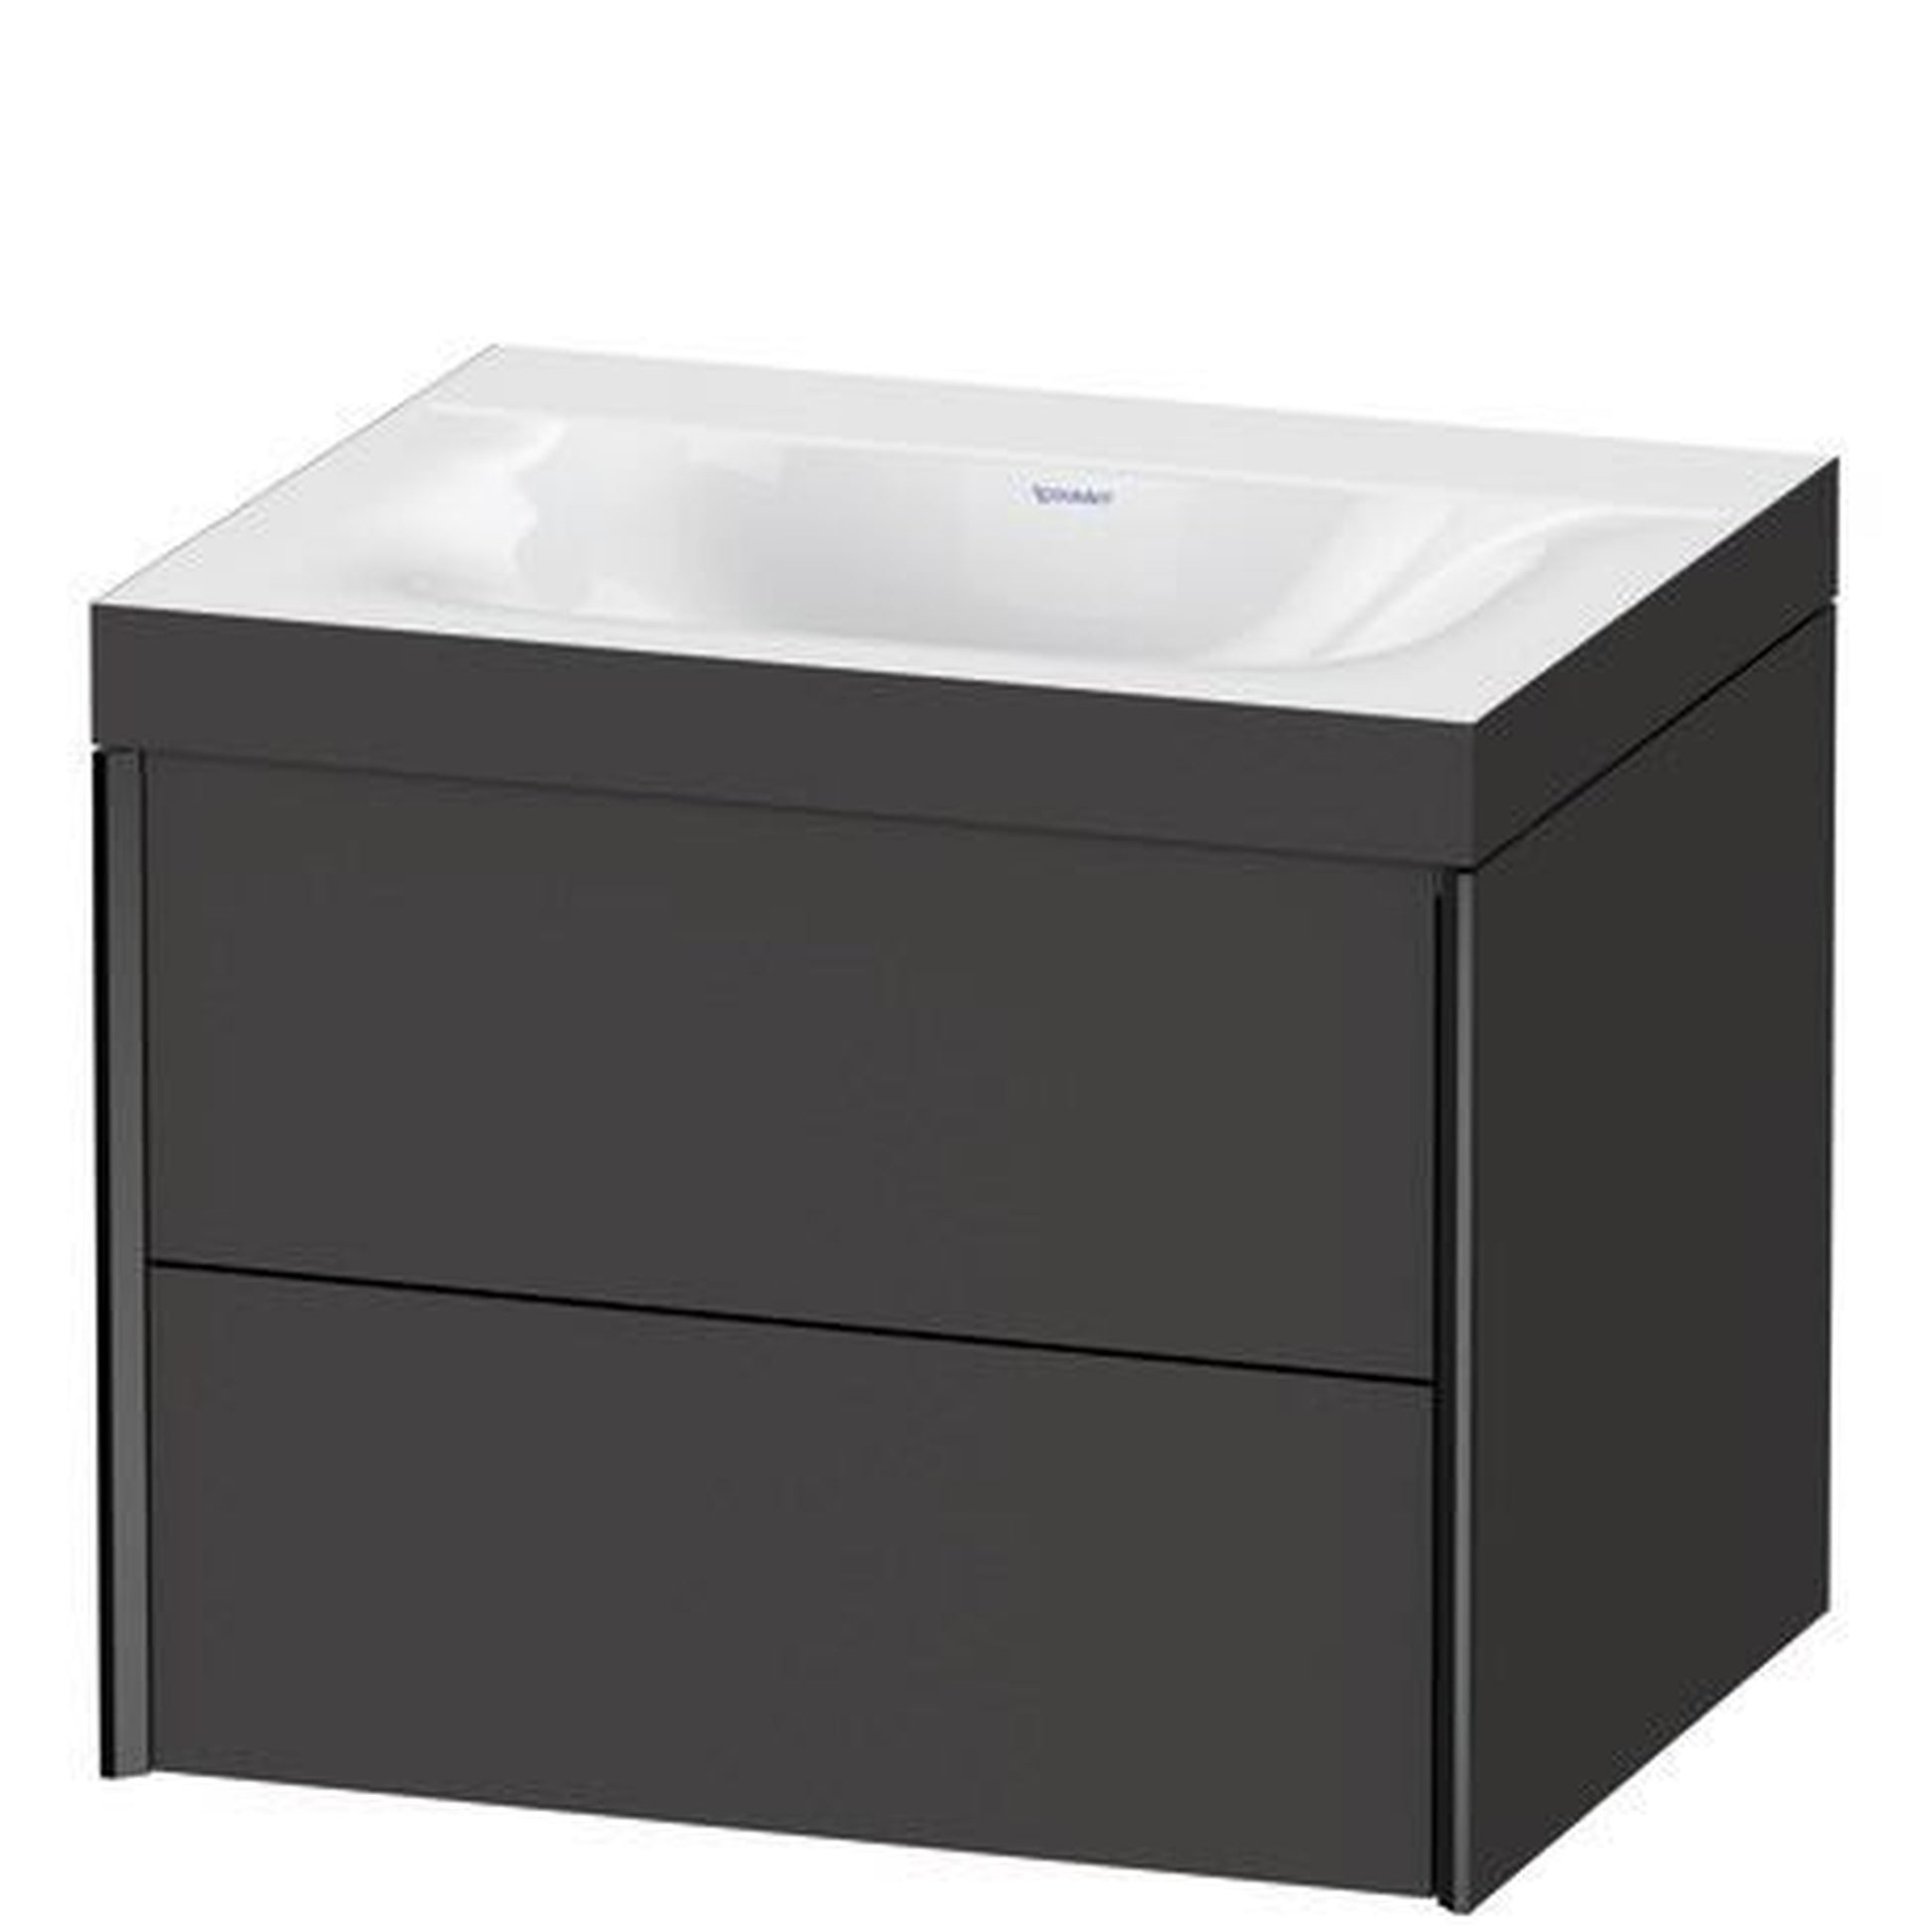 Duravit Xviu 24" x 20" x 19" Two Drawer C-Bonded Wall-Mount Vanity Kit Without Tap Hole, Graphite (XV4614NB280C)